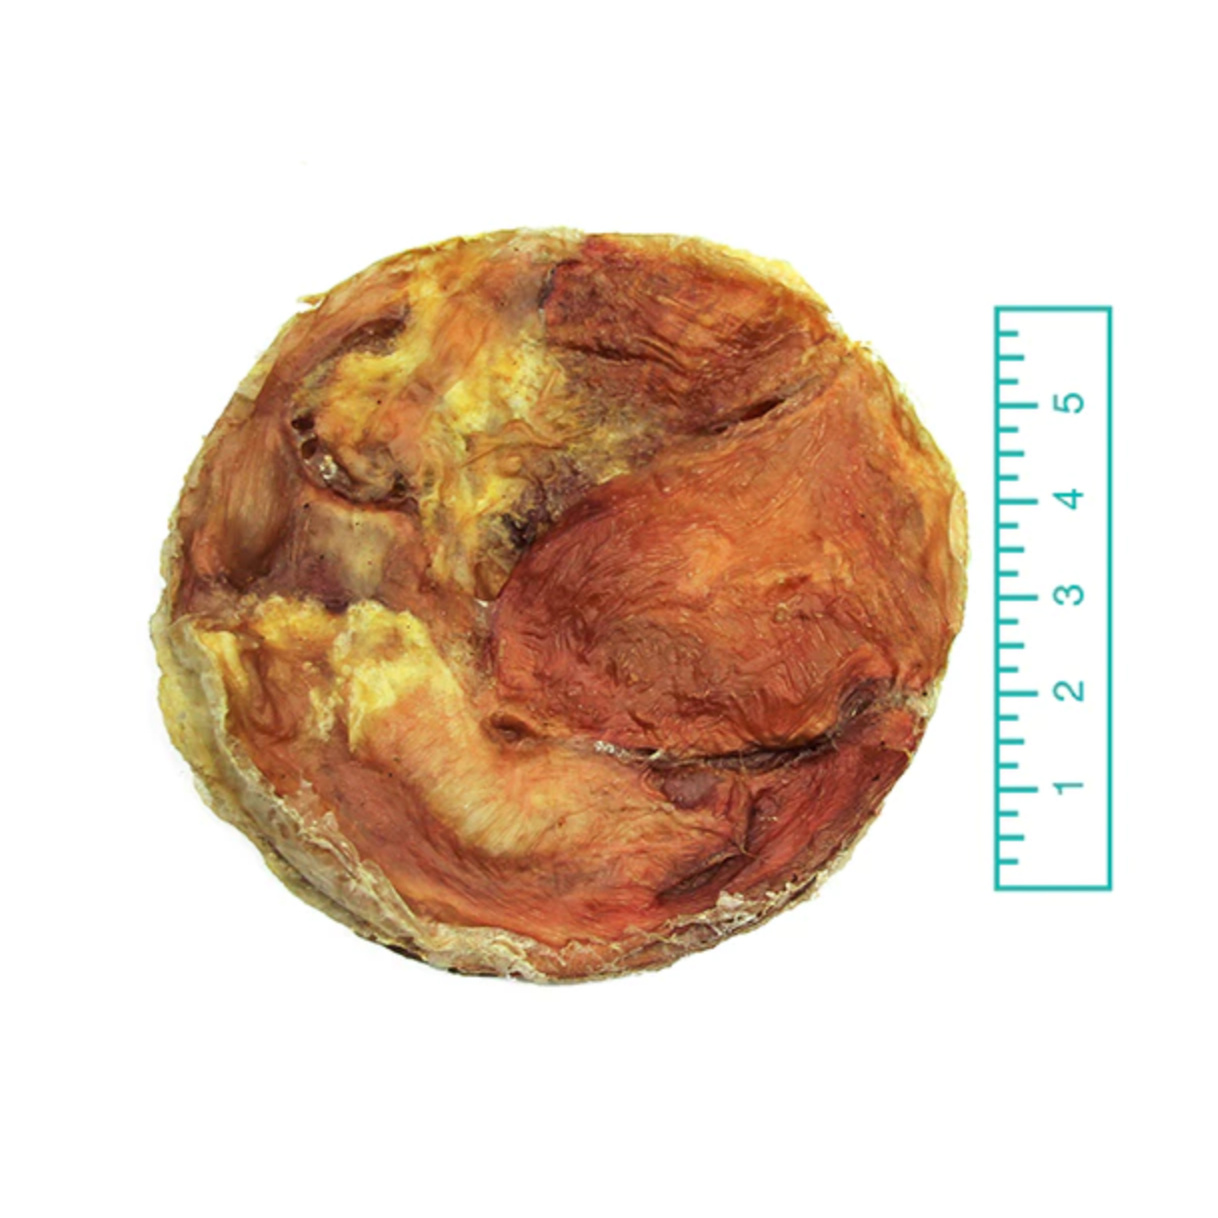 beef bladder disc is about 6" in diameter